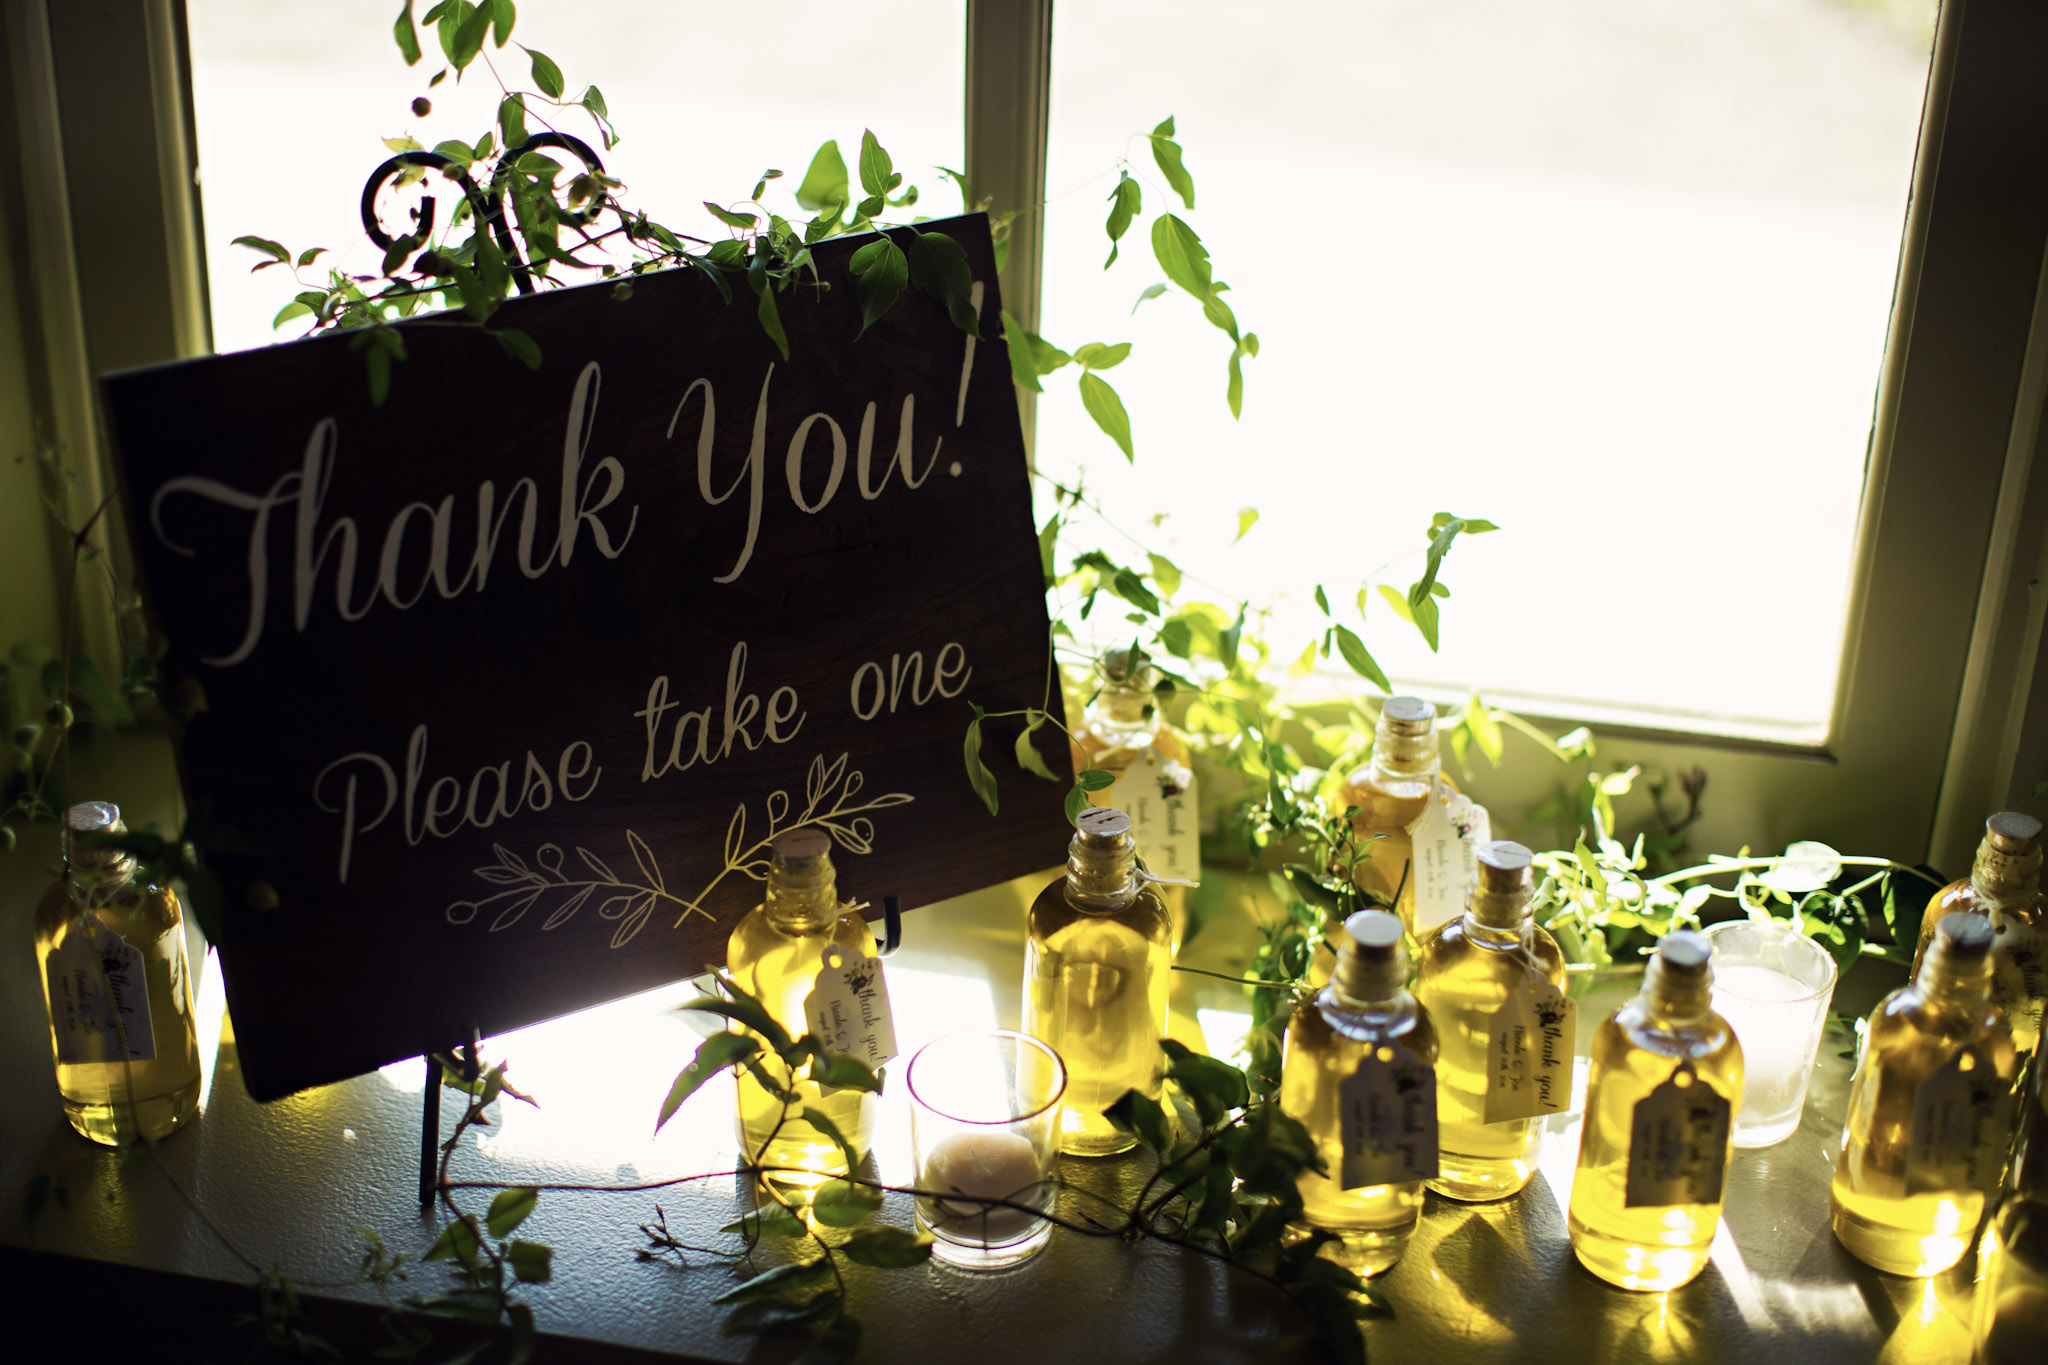 Photo by Elizabeth Fox of scented oil bottles for wedding guests